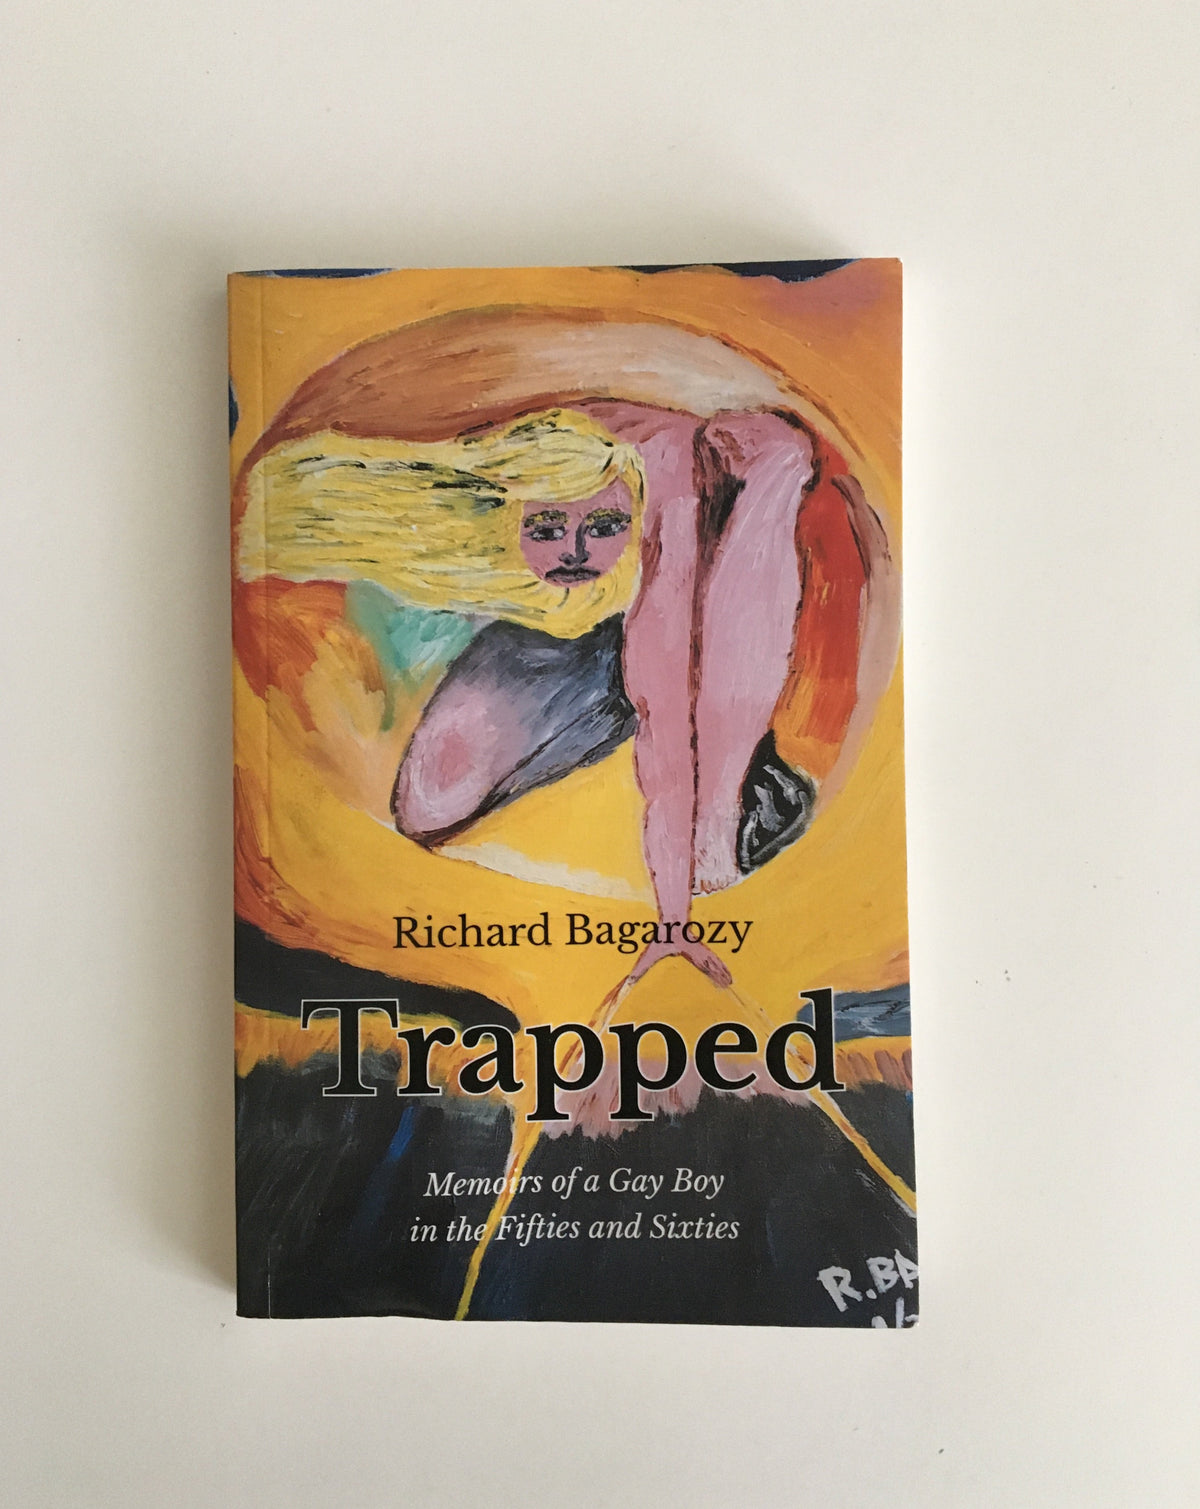 Trapped: Memoirs of a Gay Boy in the Fifties and Sixties by Richard Bagarozy